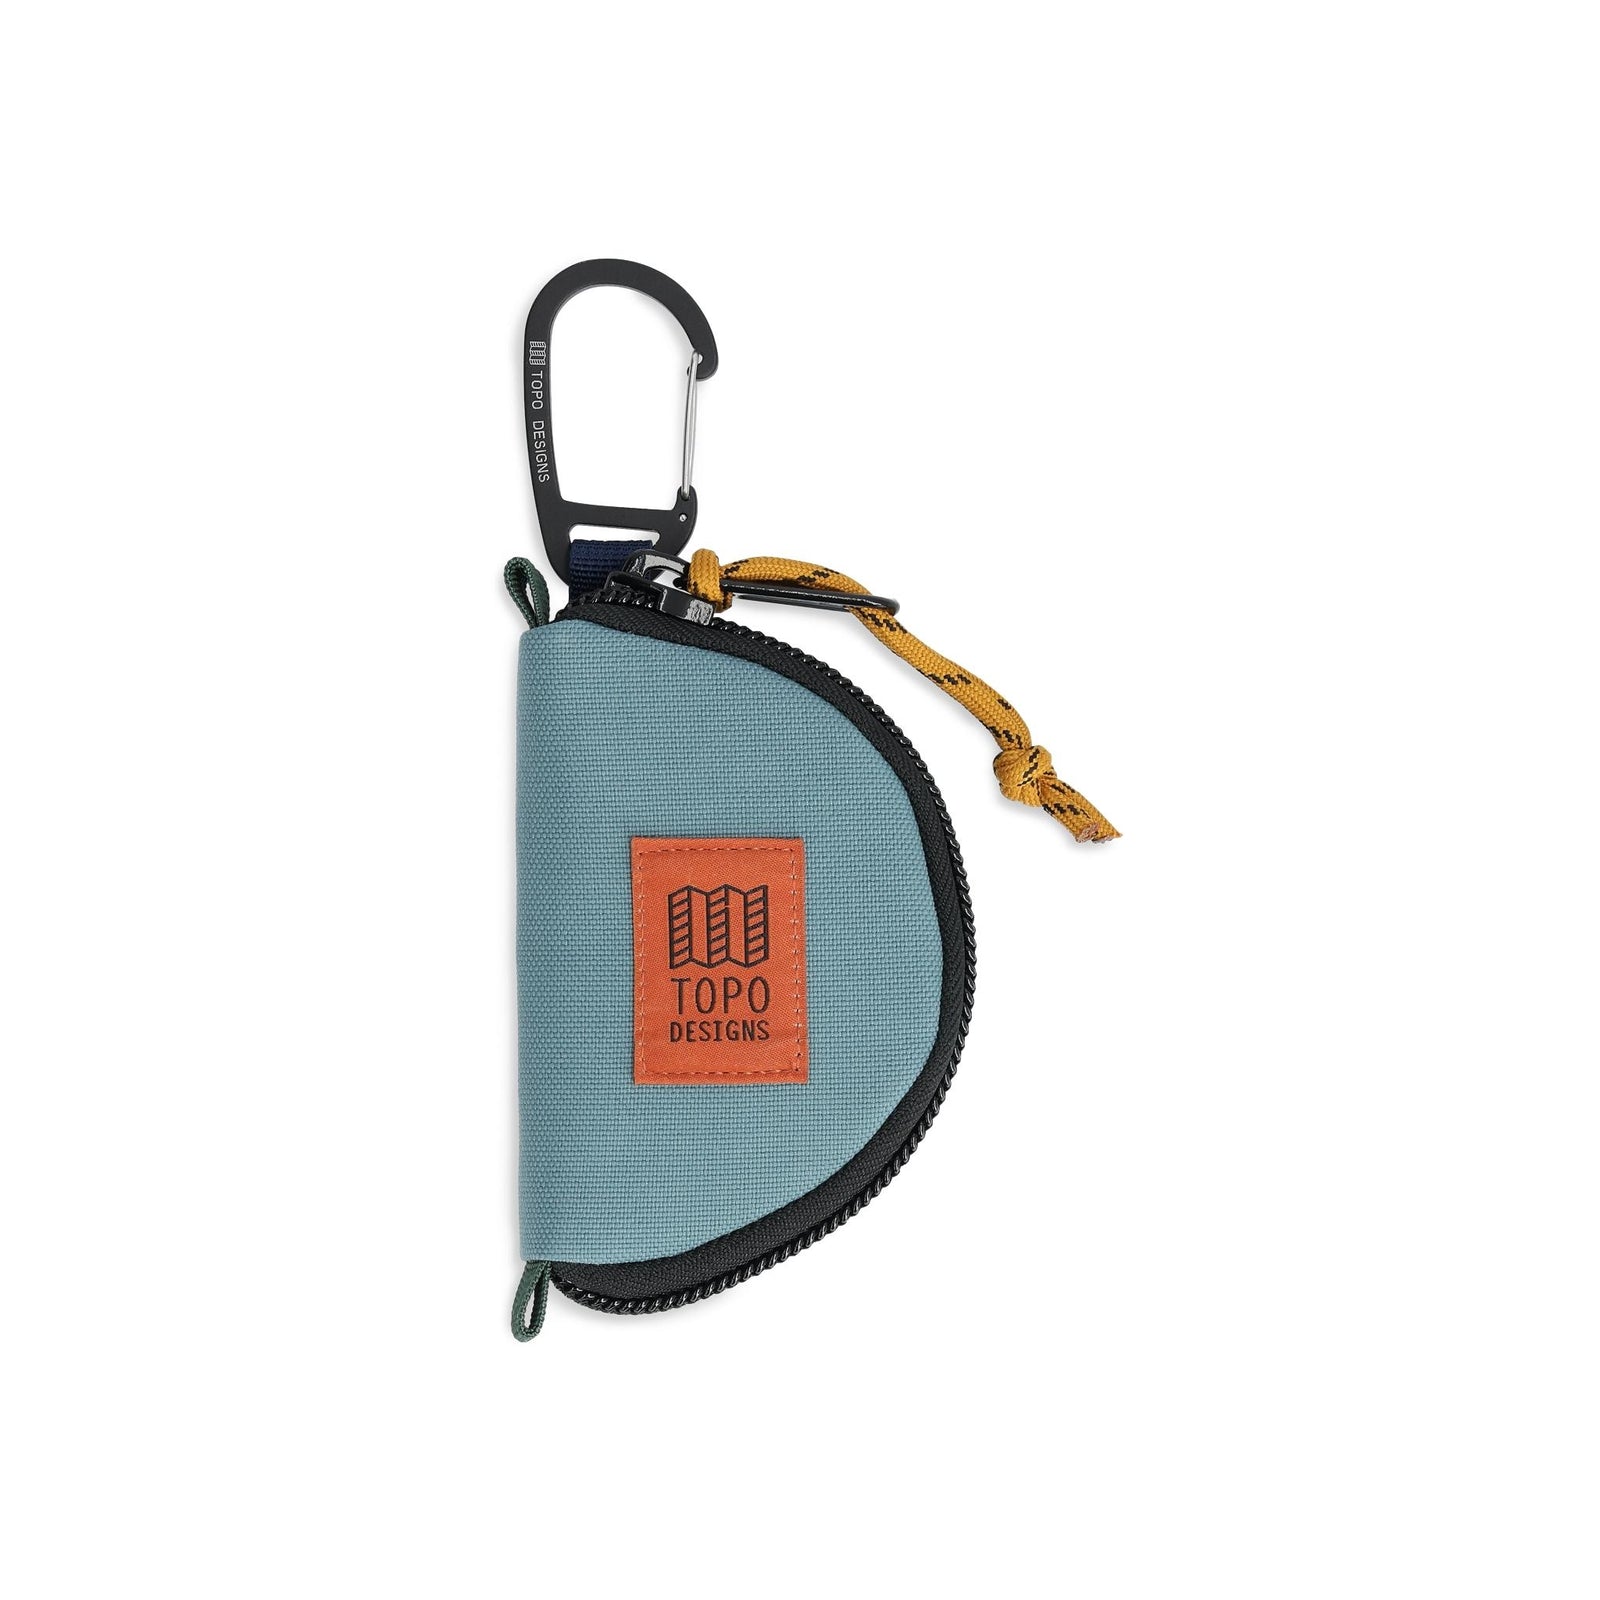 Front View of Topo Designs Taco Bag in "Sea Pine"